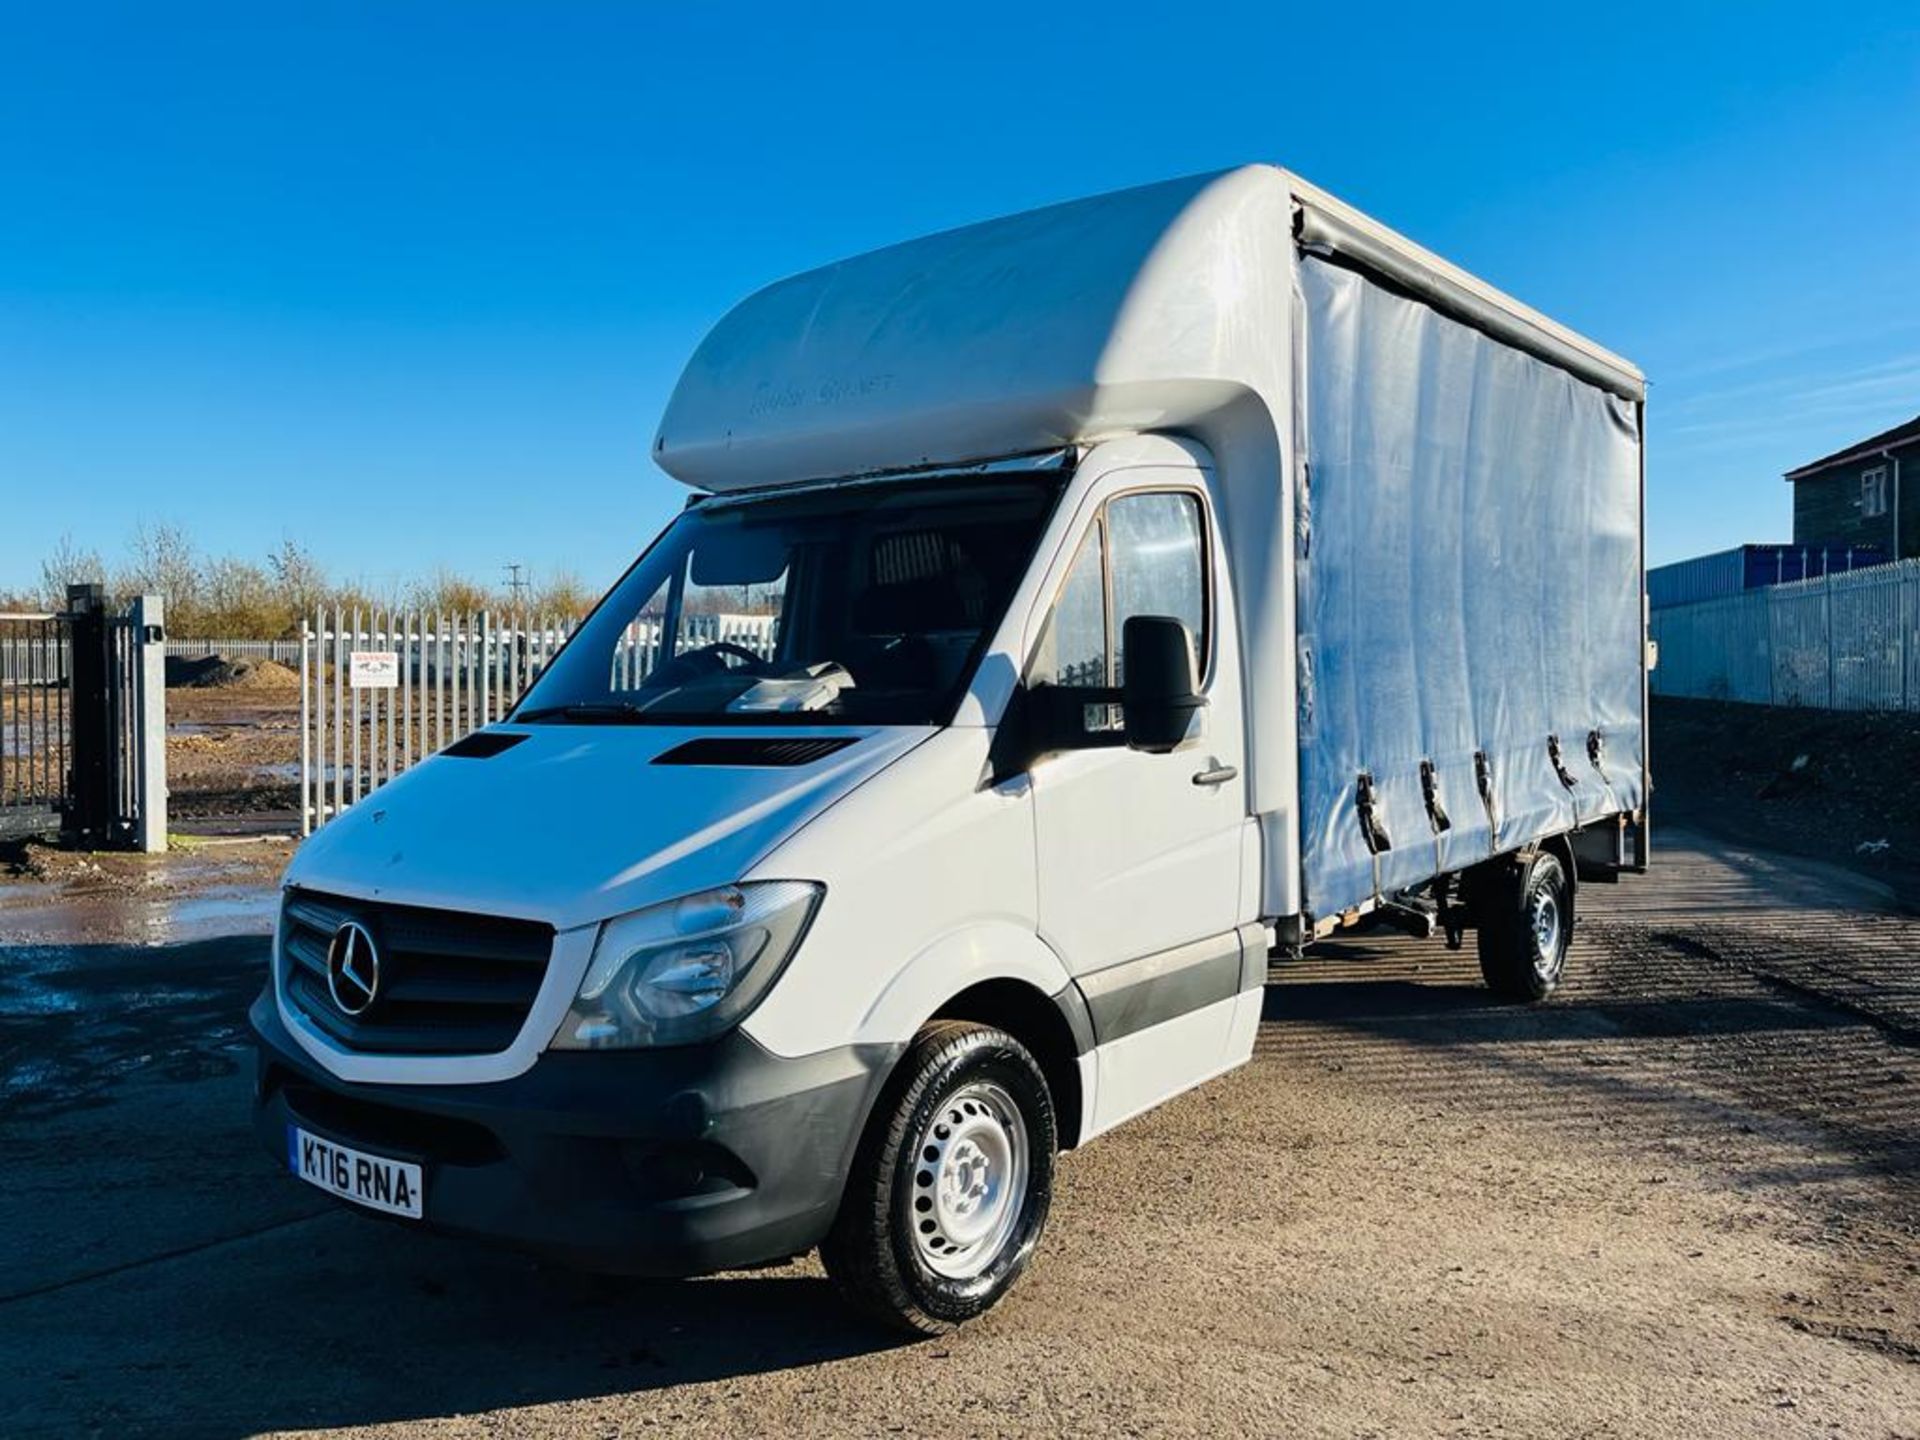 ** ON SALE ** Mercedes Benz Sprinter 2.1 313 CDI L3 Curtain sider Luton 2016 '16 Reg' Tail Lift - Image 3 of 25